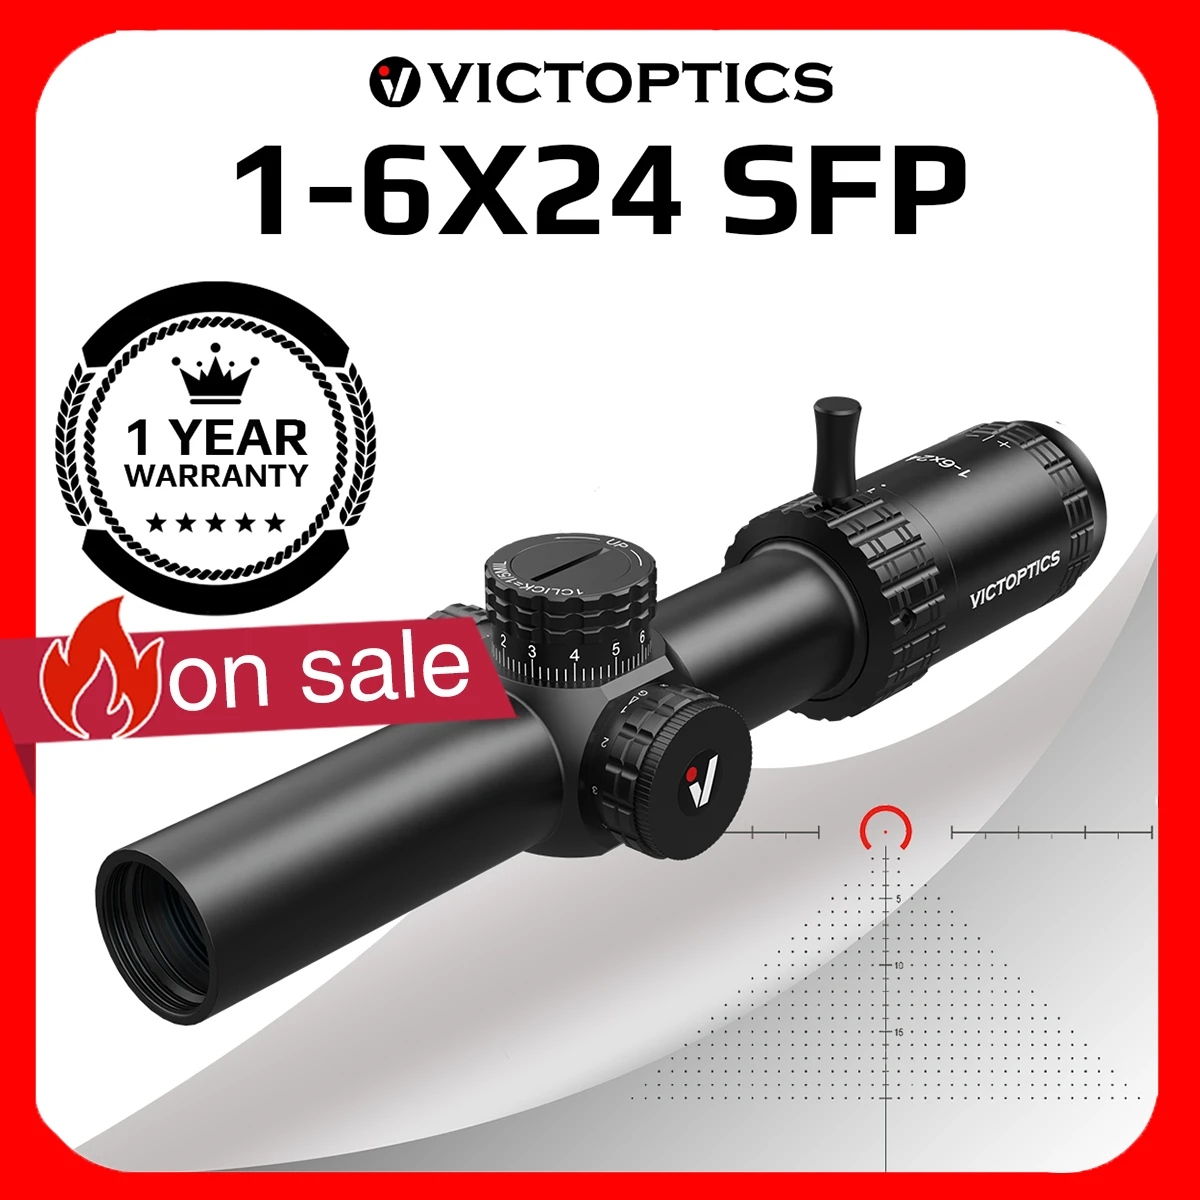 VictOptics S6 1-6x24 SFP Riflescope With Red&Green Illumination Turret lock System Wide Field of View Design For AR 15 .223 5.56